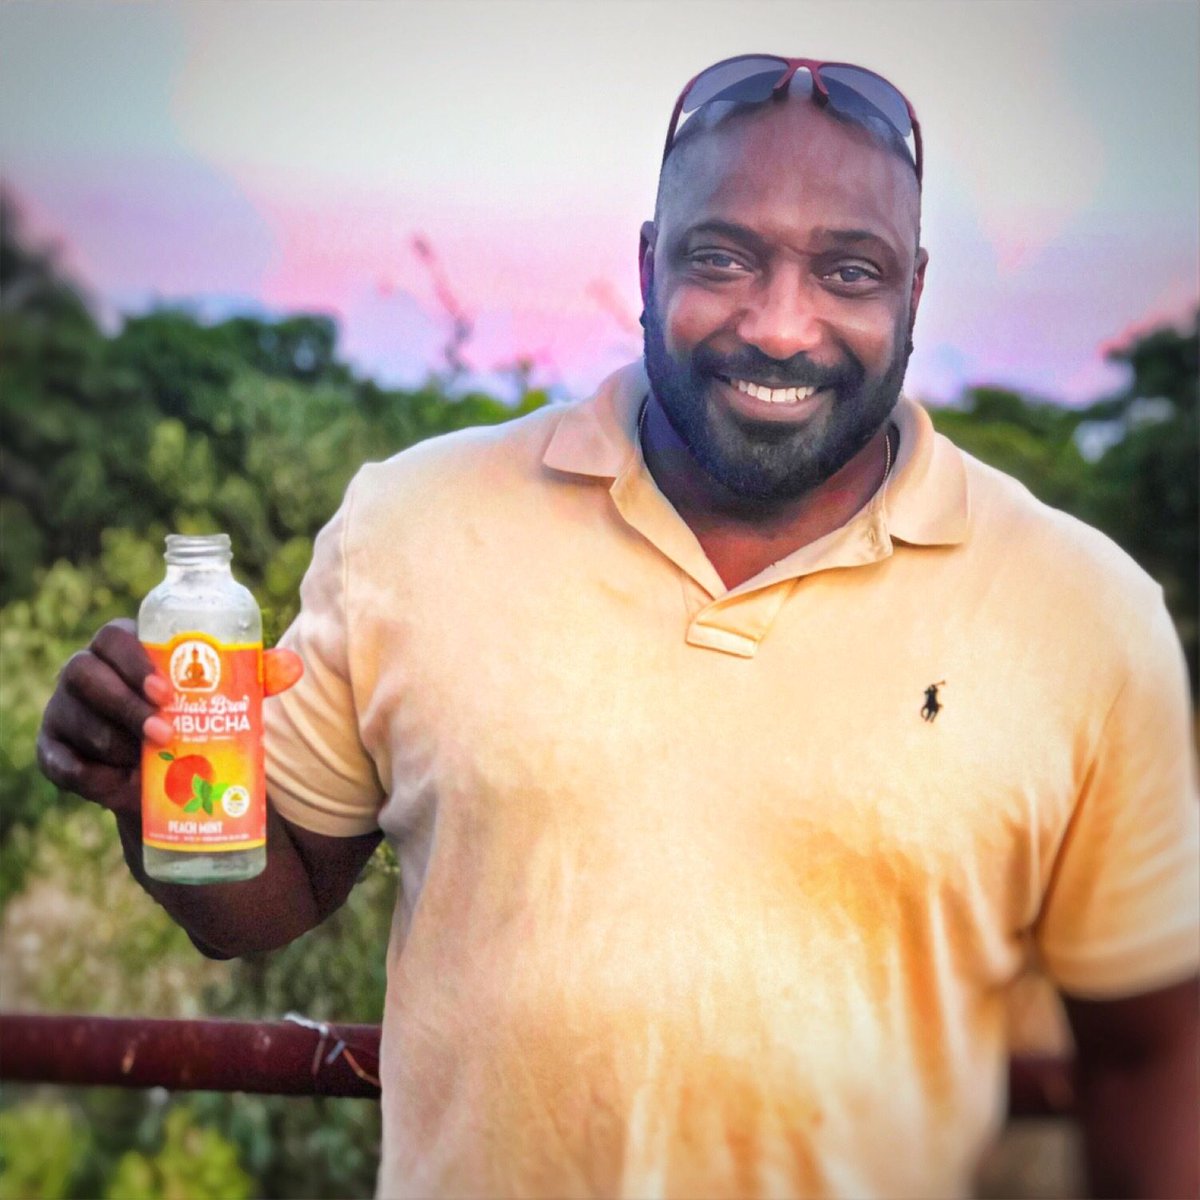 Did you know Peach Mint is one of y'alls favorite flavor? This peachy minty is refreshing every time of year.
-
-
#Peach #PeachMint #TopFlavor #FavoriteFlav #LocalFlavor #LocalBusiness #SupportLocal #LocalBrewery #Austin #AustinProud #HappyHealth #BeWild